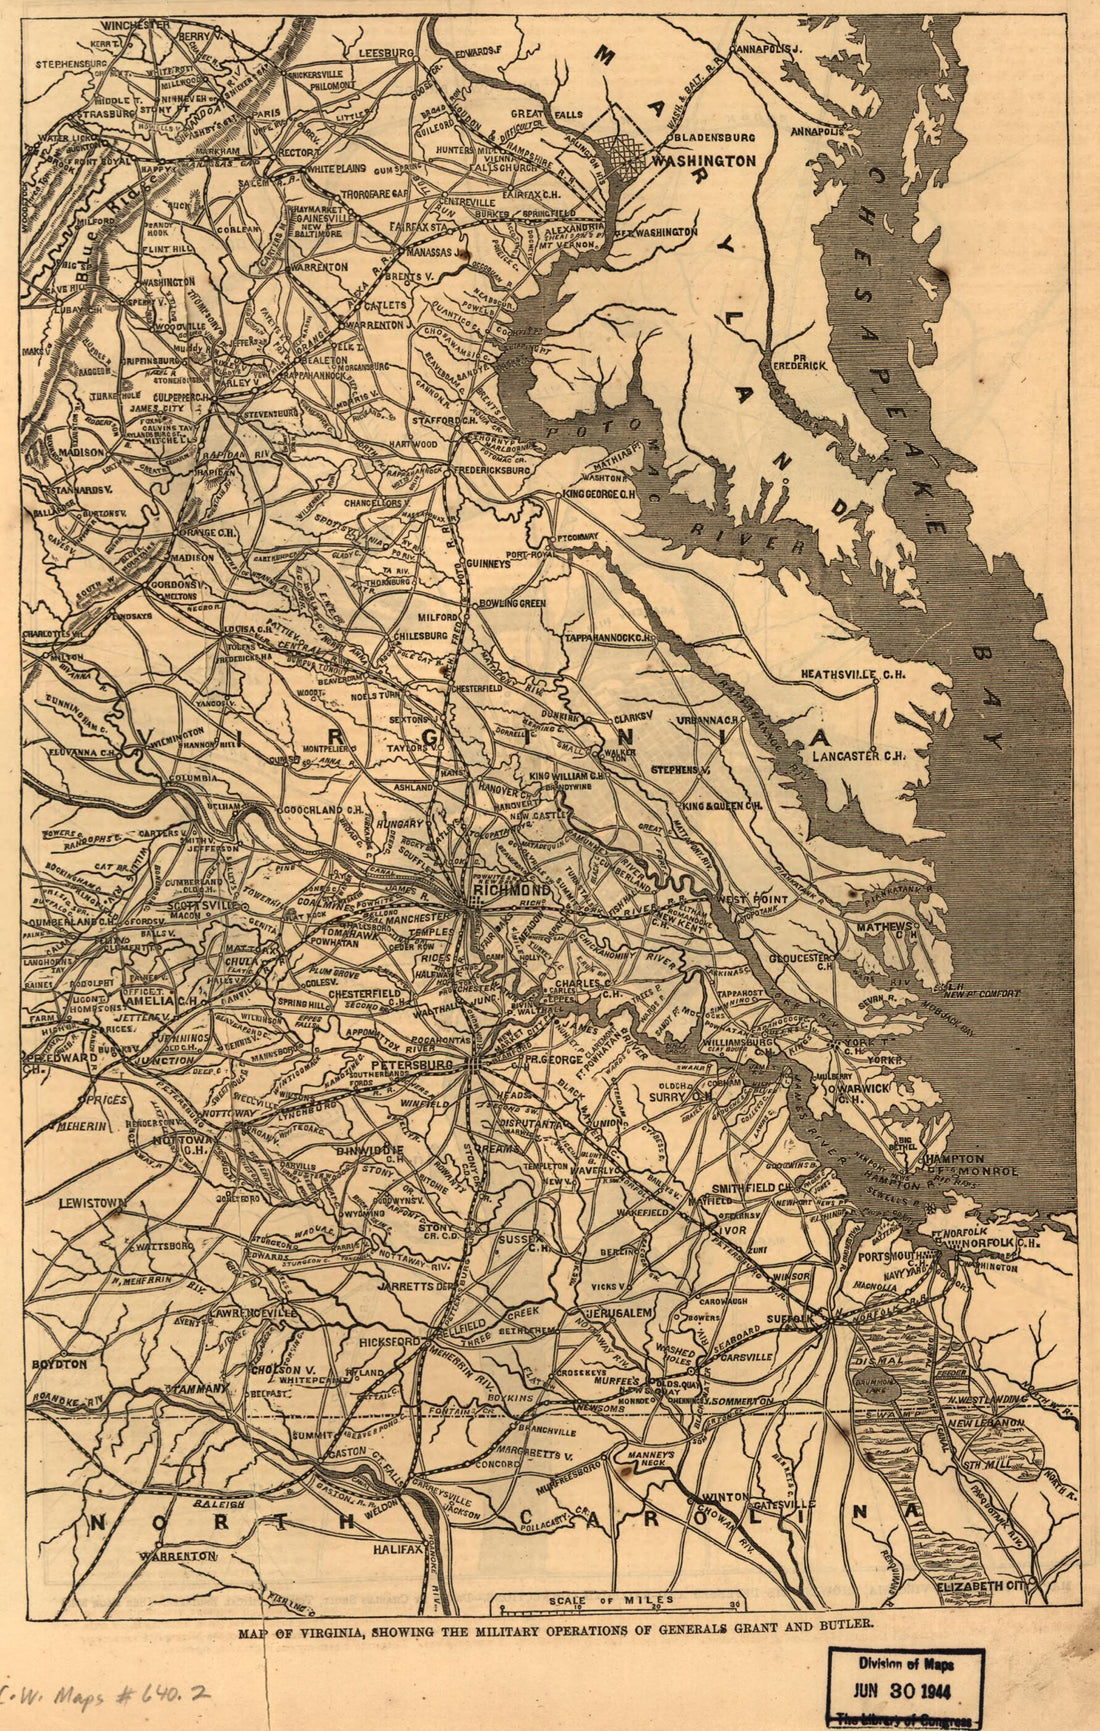 This old map of Map of Richmond, Virginia, Showing Its Defenses and Railroad Connections from 1864 was created by Charles Sholl in 1864